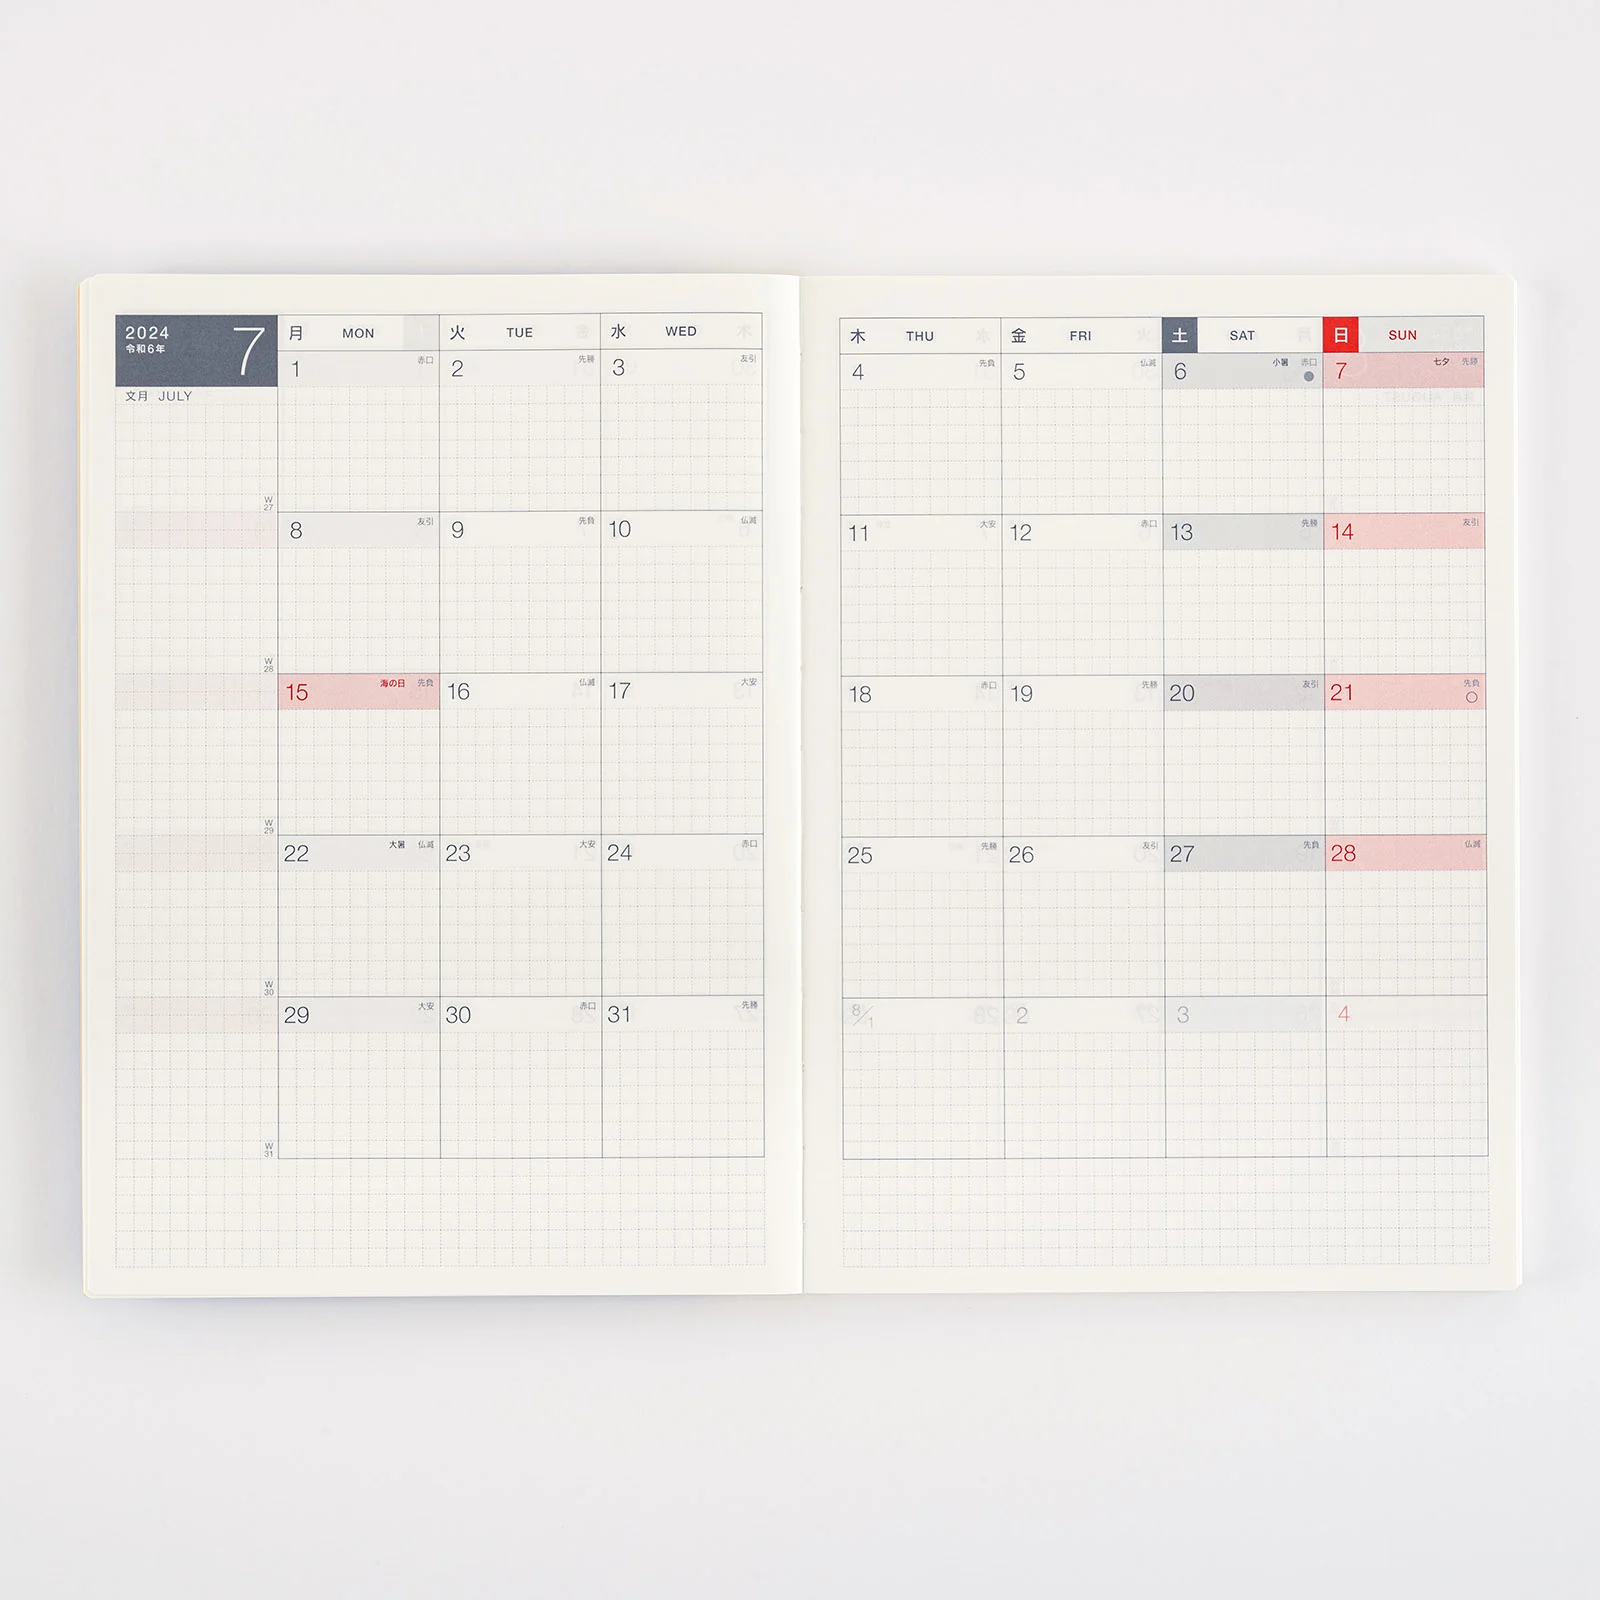 Hobonichi Techo Day-Free Book A5 Size A5 size / Monthly / Jan